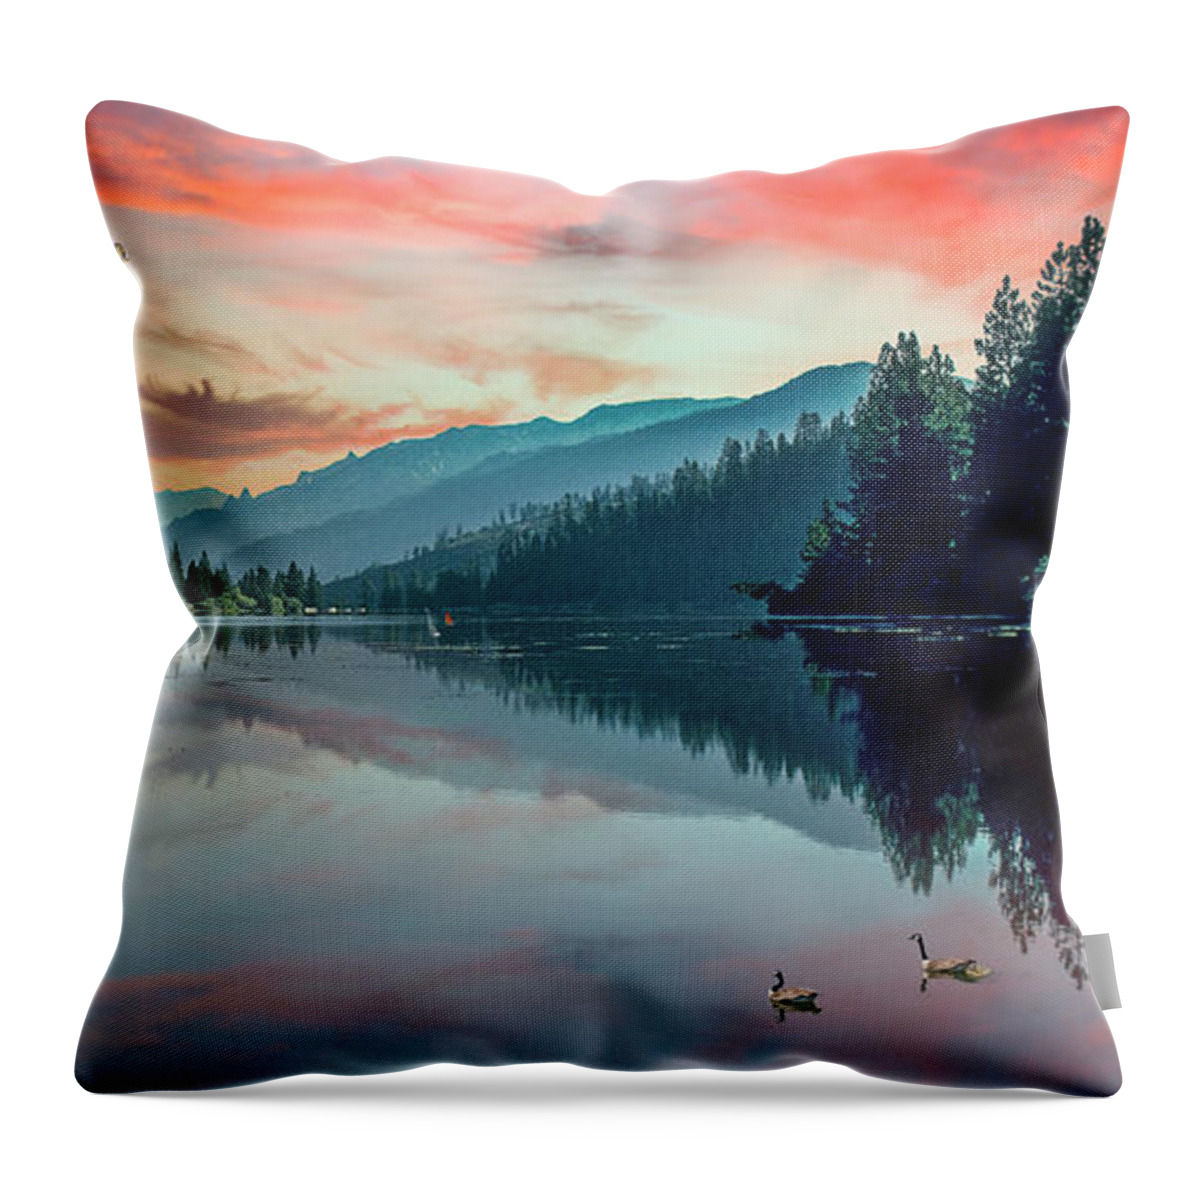 Time Wasted At The Lake Reflect The Beauty Around It And Is Time Well Spent Throw Pillow featuring the photograph I Lake You by David Zanzinger